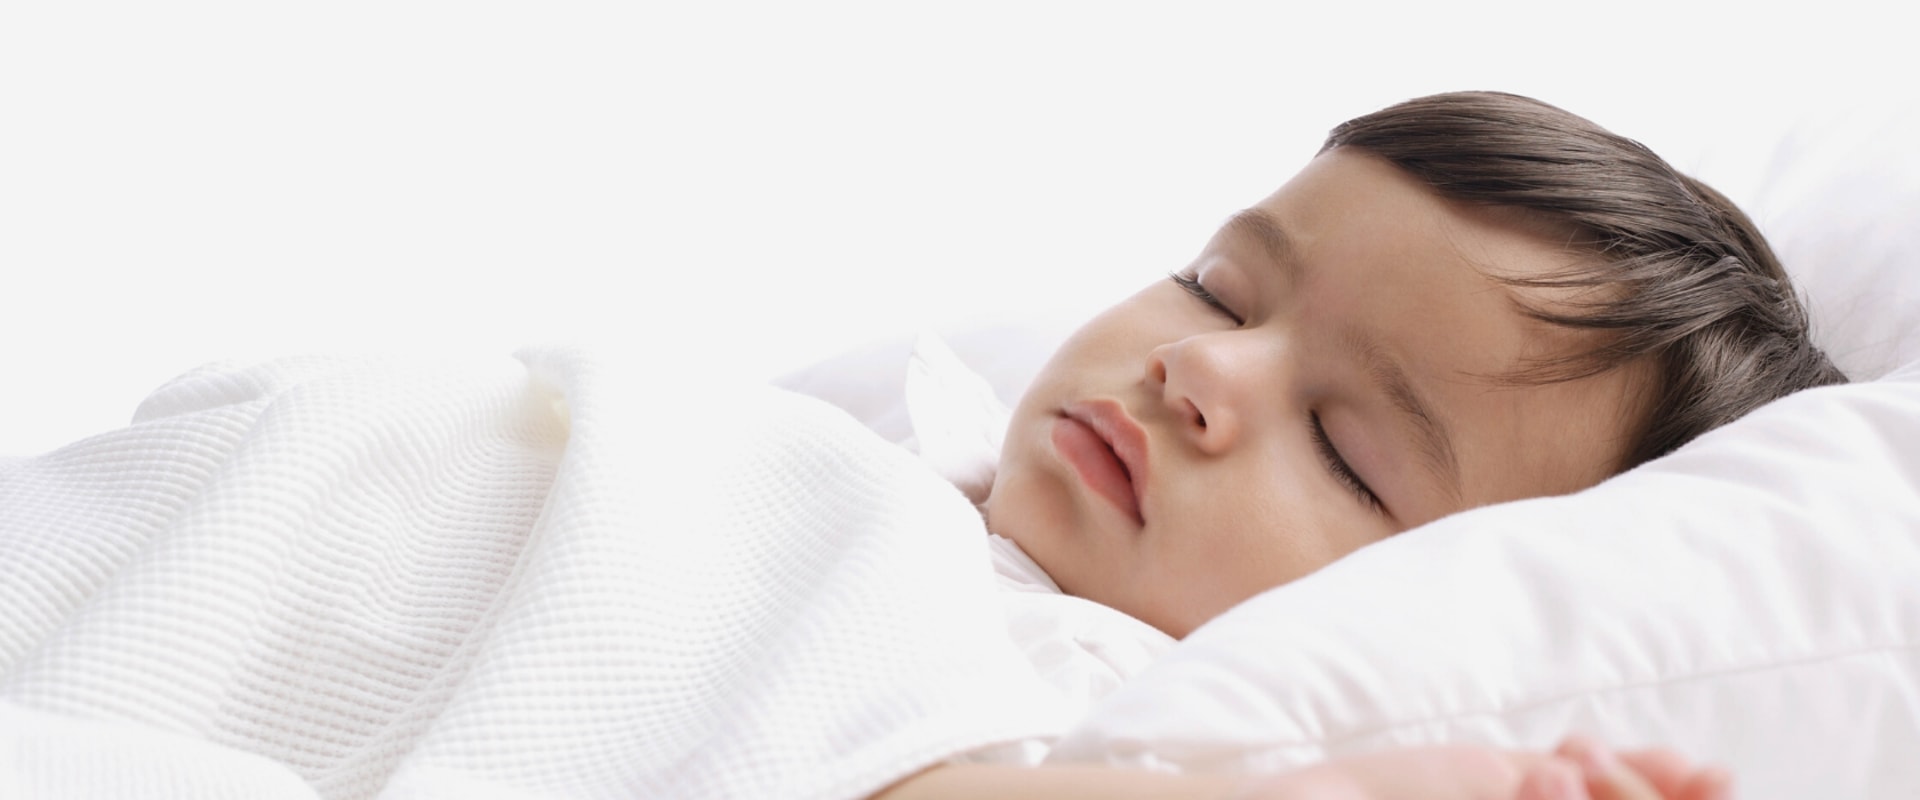 When Should I Expect a Sleep Regression in My Baby?